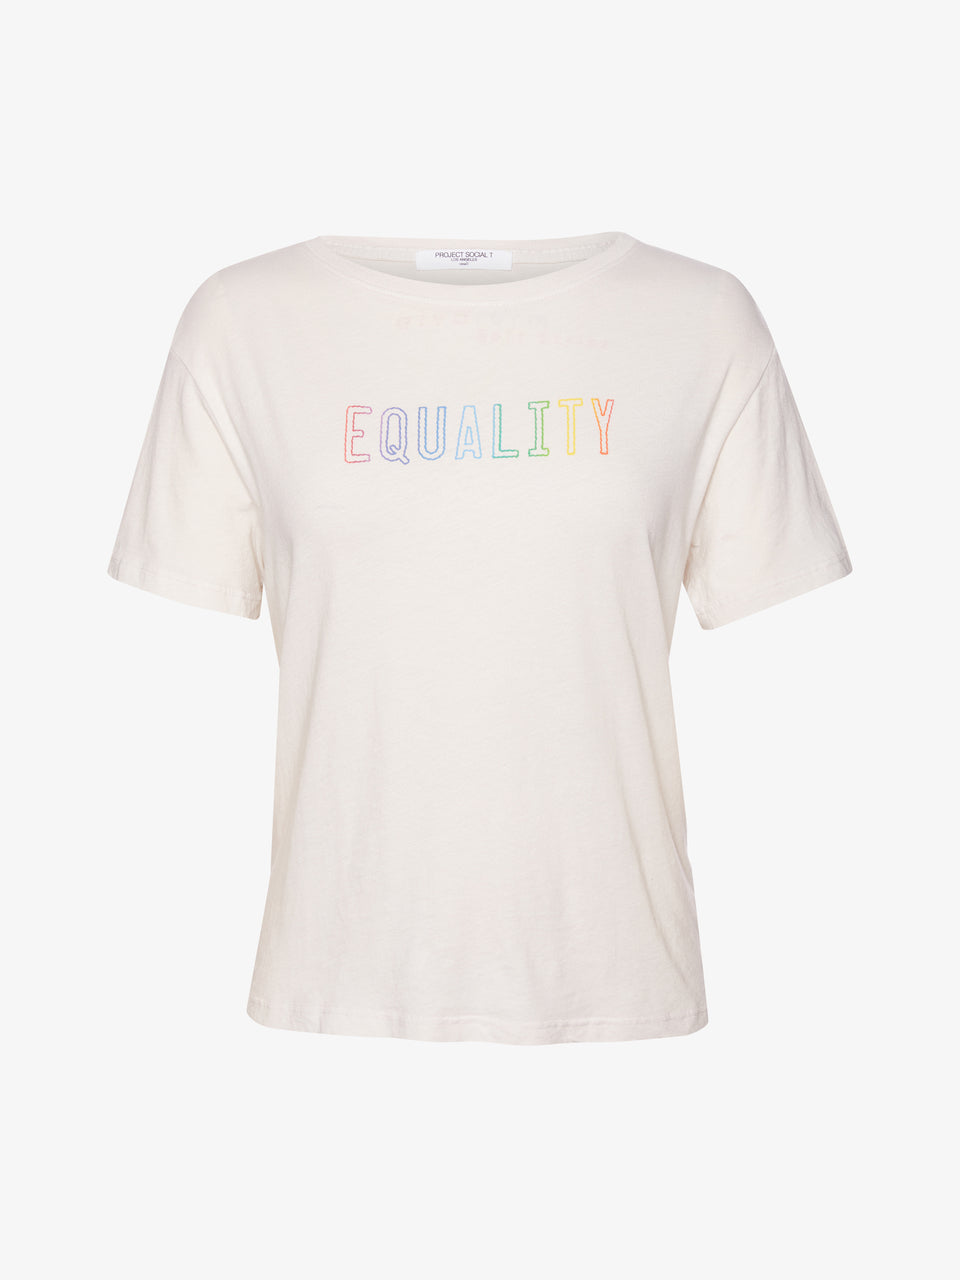 PROJECT_SOCIAL_T_EQUALITY_TEE_VINTAGE_WHITE